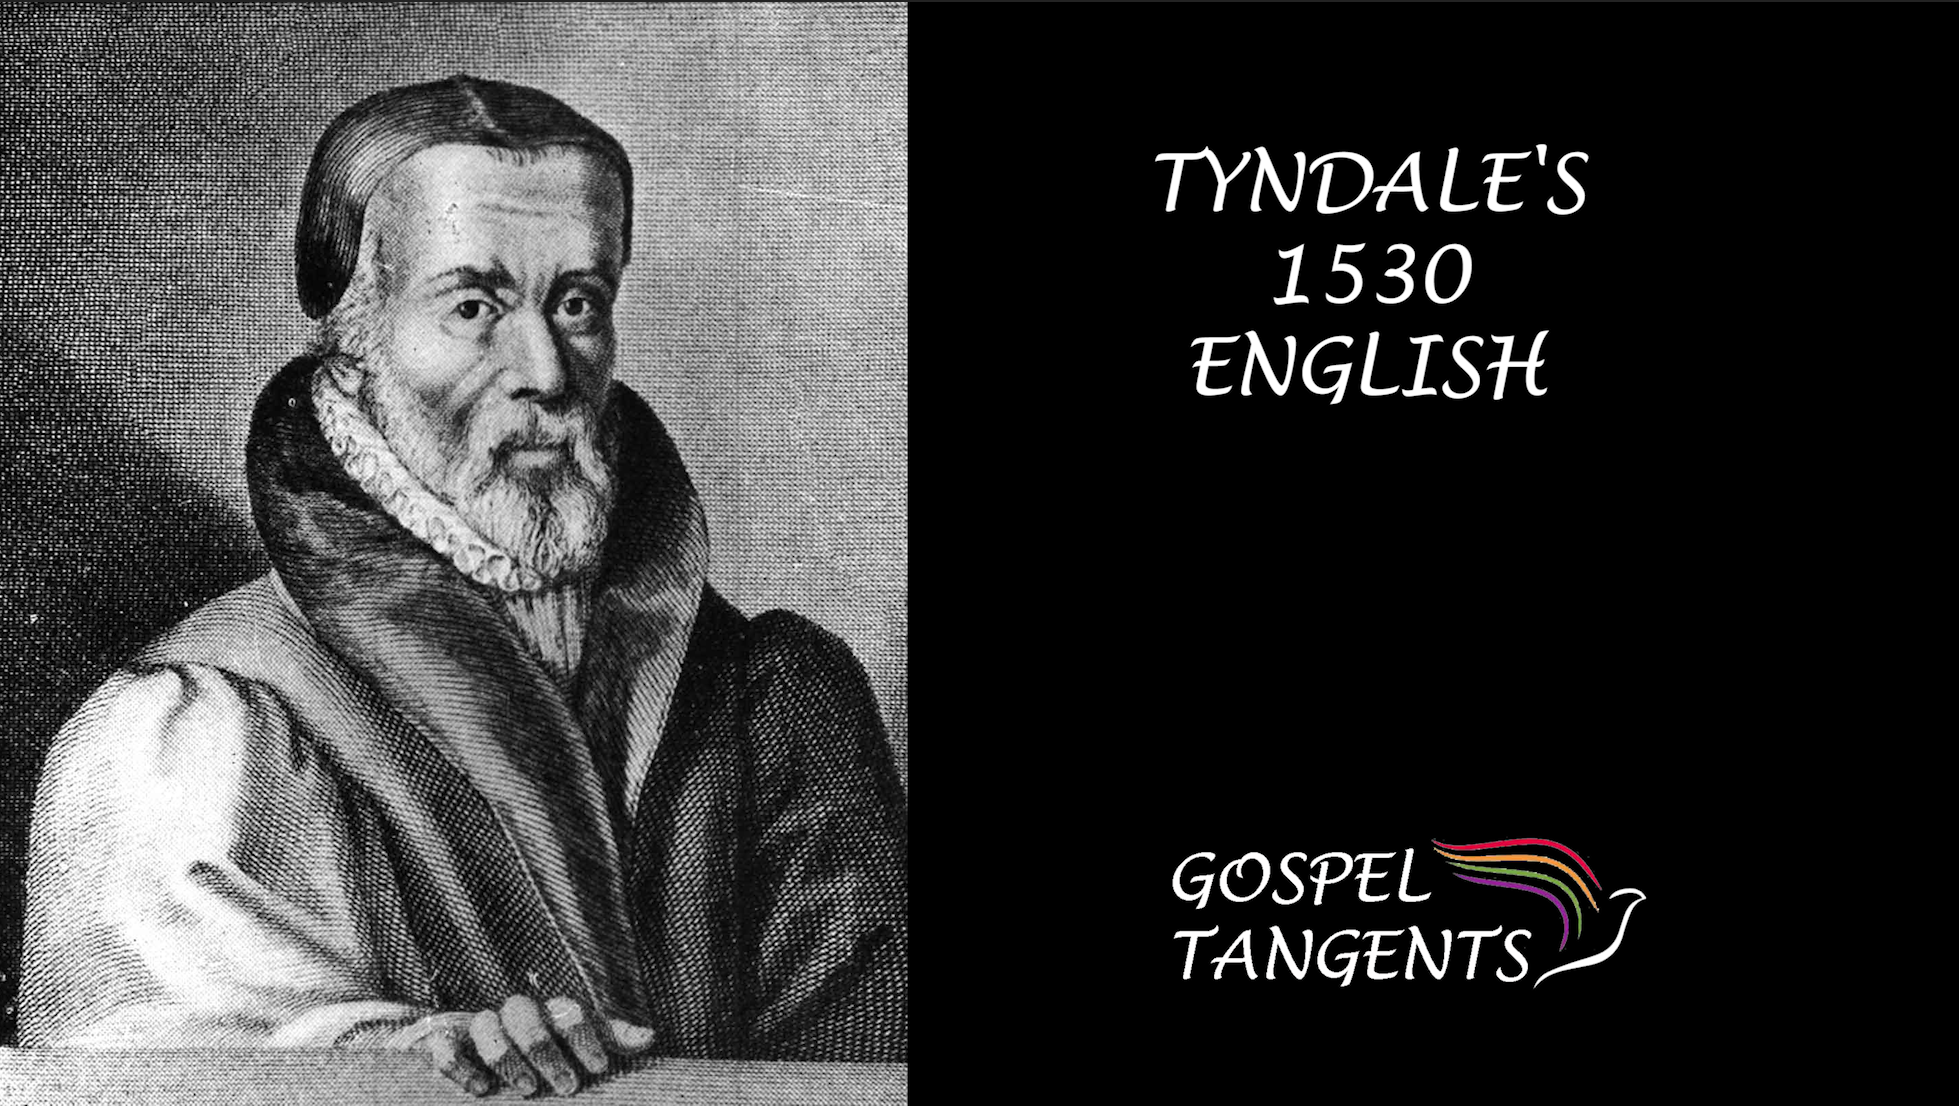 - Tyndale's 1530 English (Part 3 of 8) - Mormon History Podcast